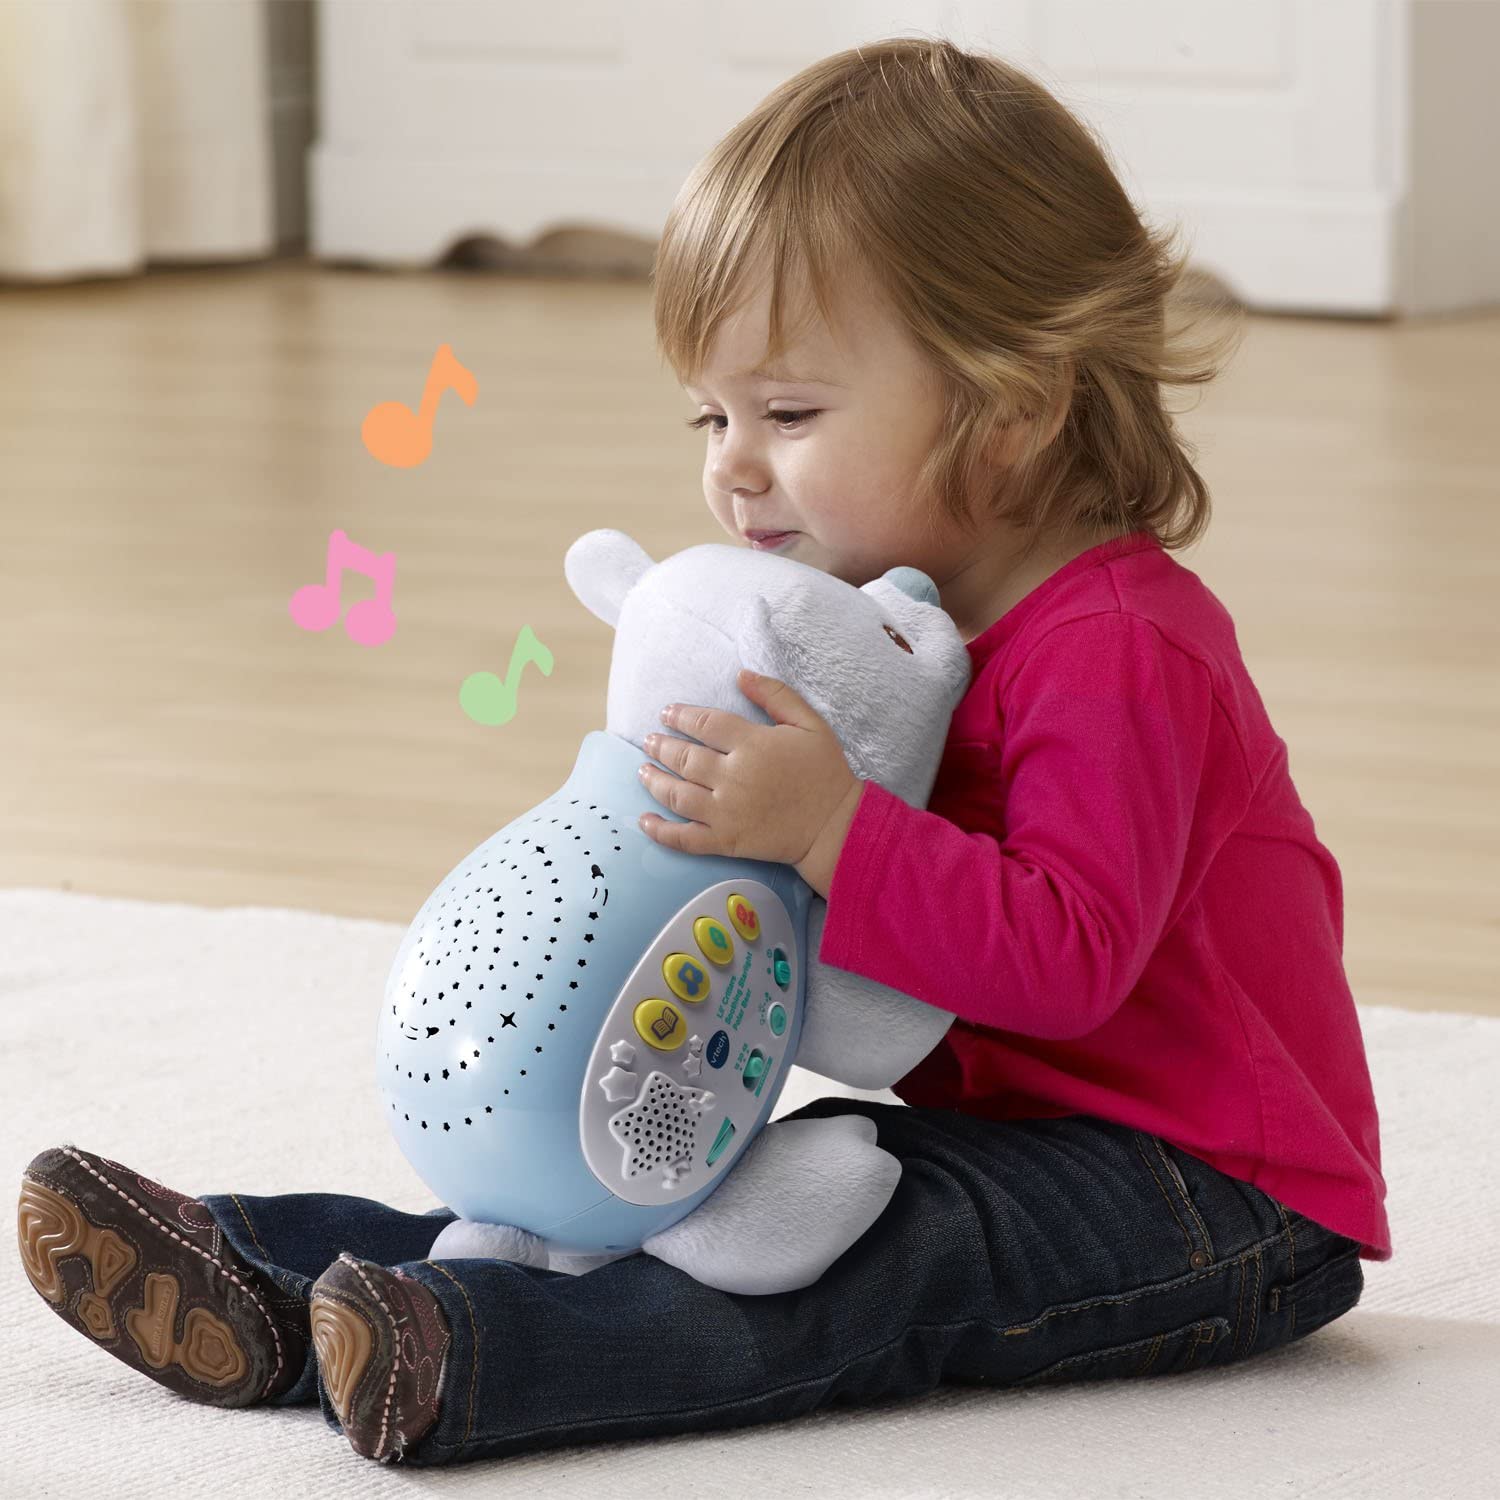 Babies Can Have Sweet Dreams with the Lil' Critters Soothing 